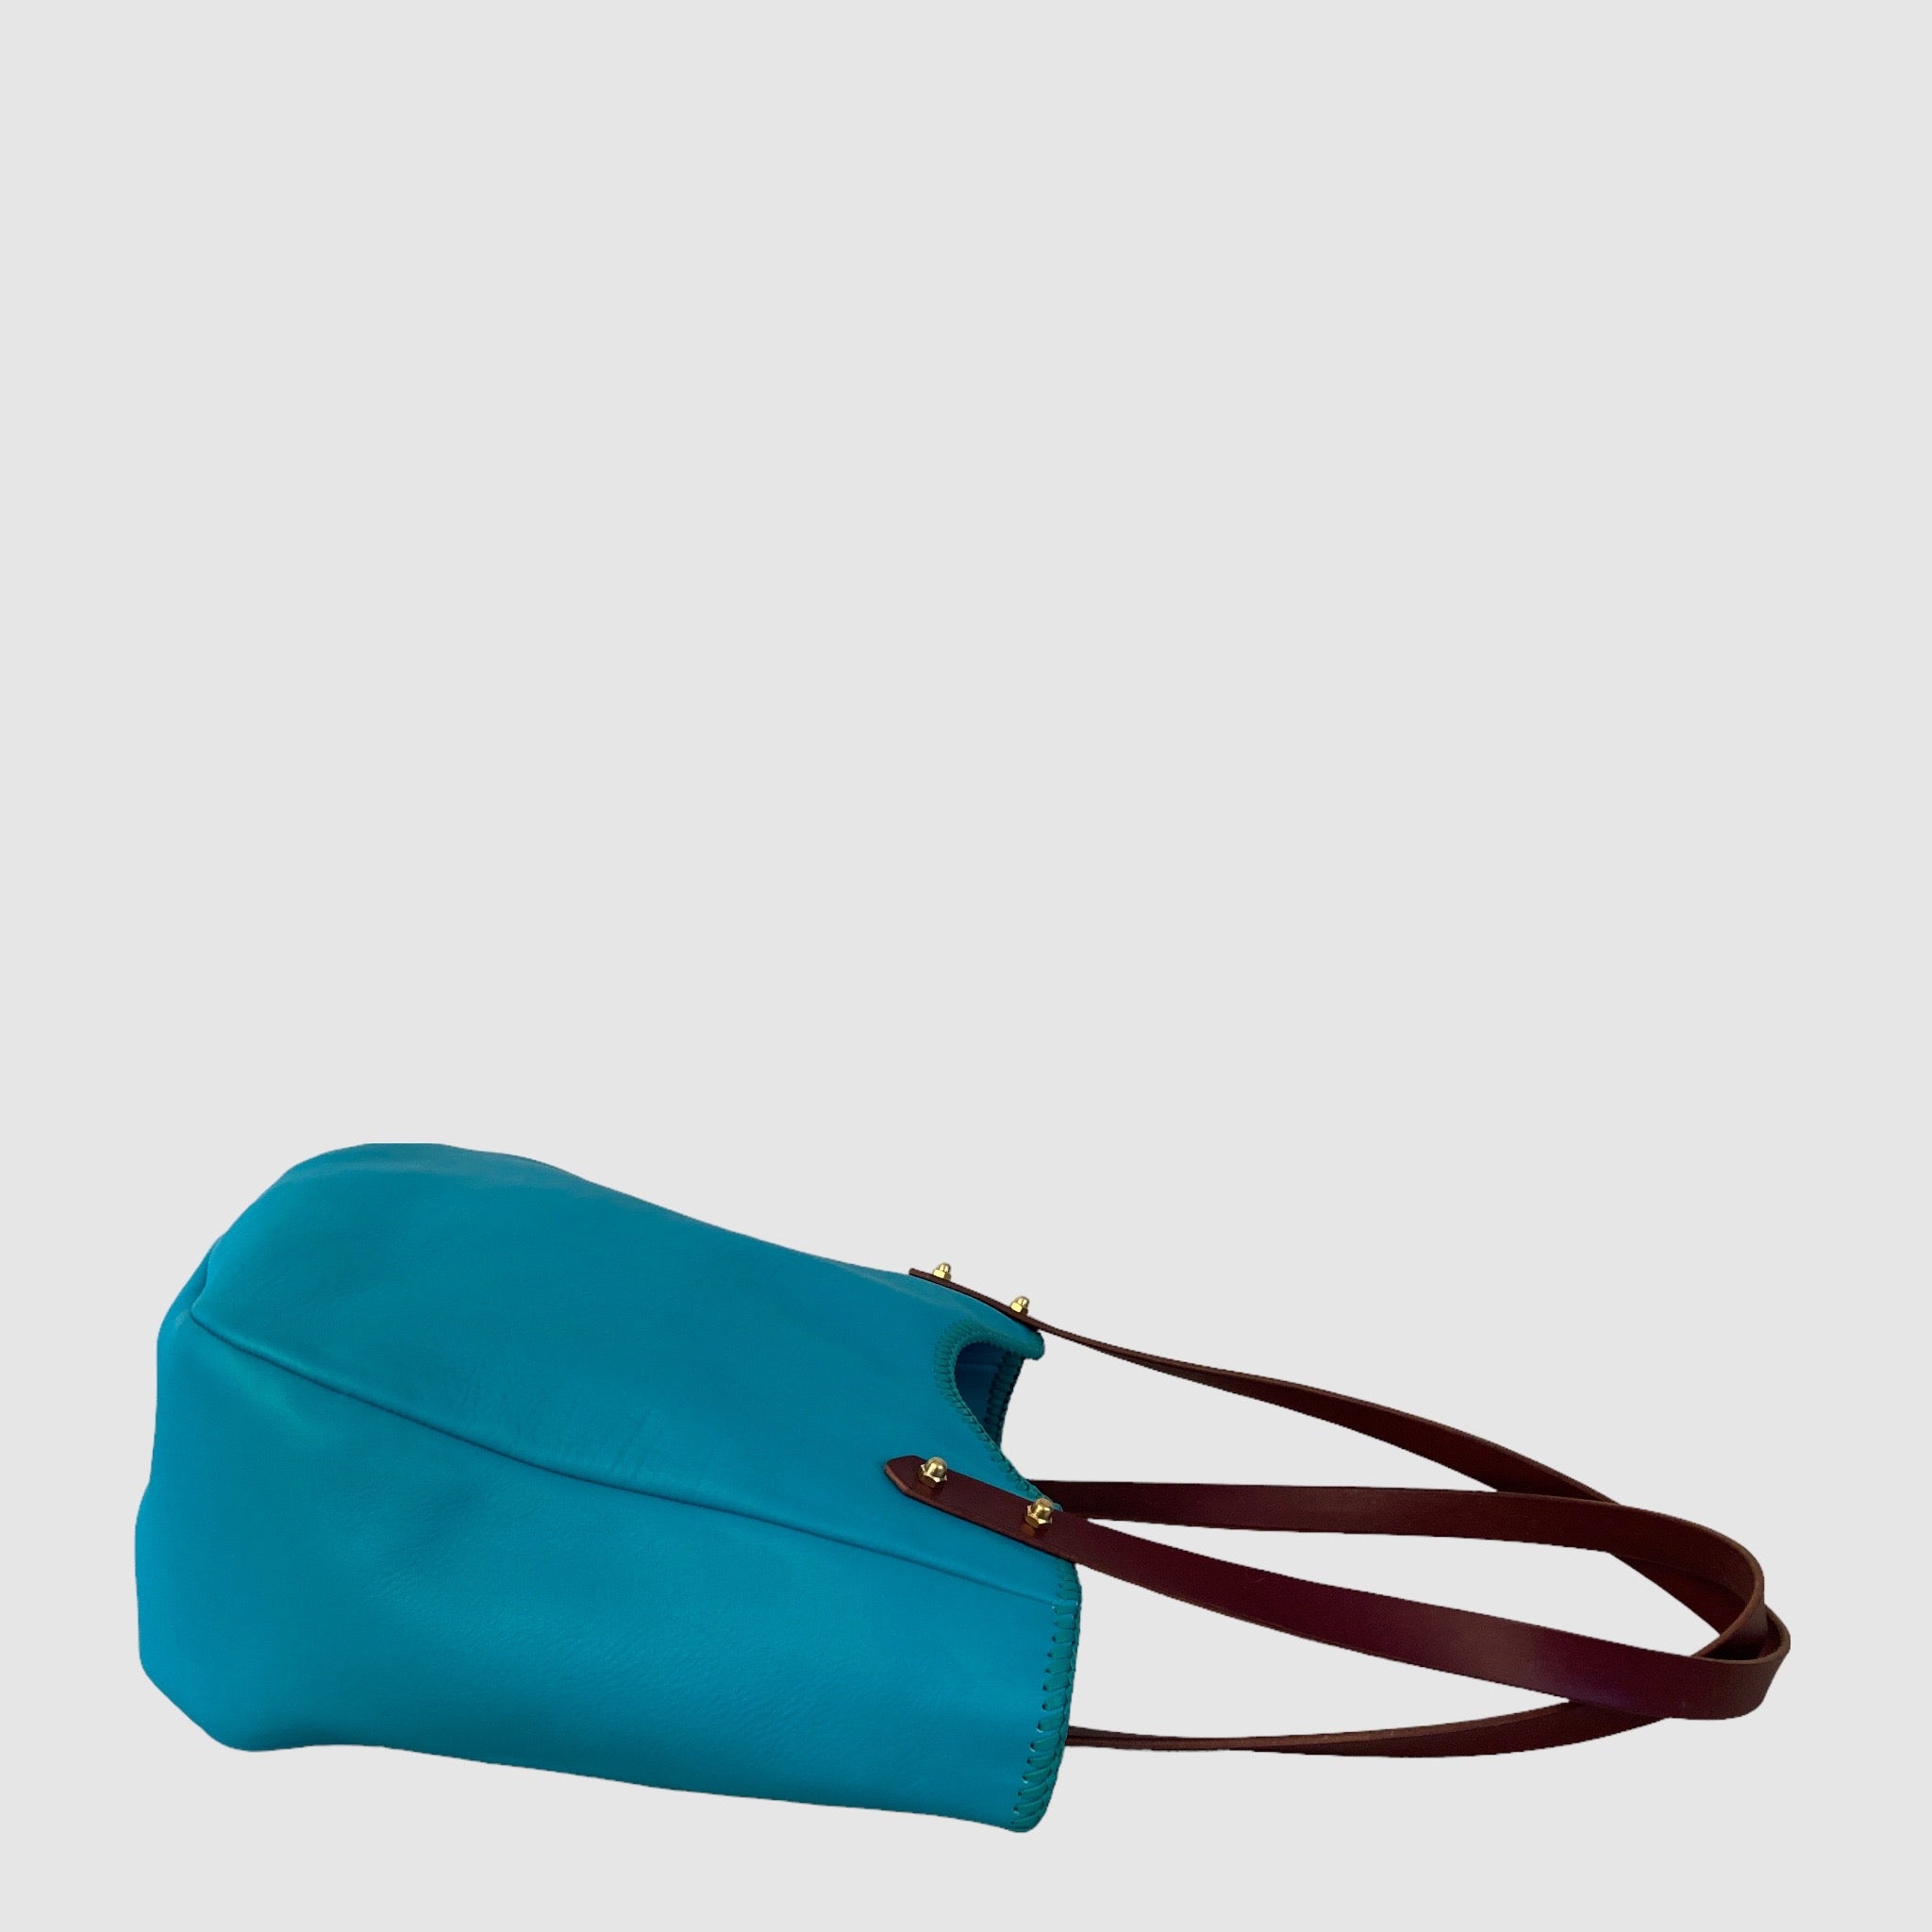 OUTSIDER CARRY ALL // TURQUOISE